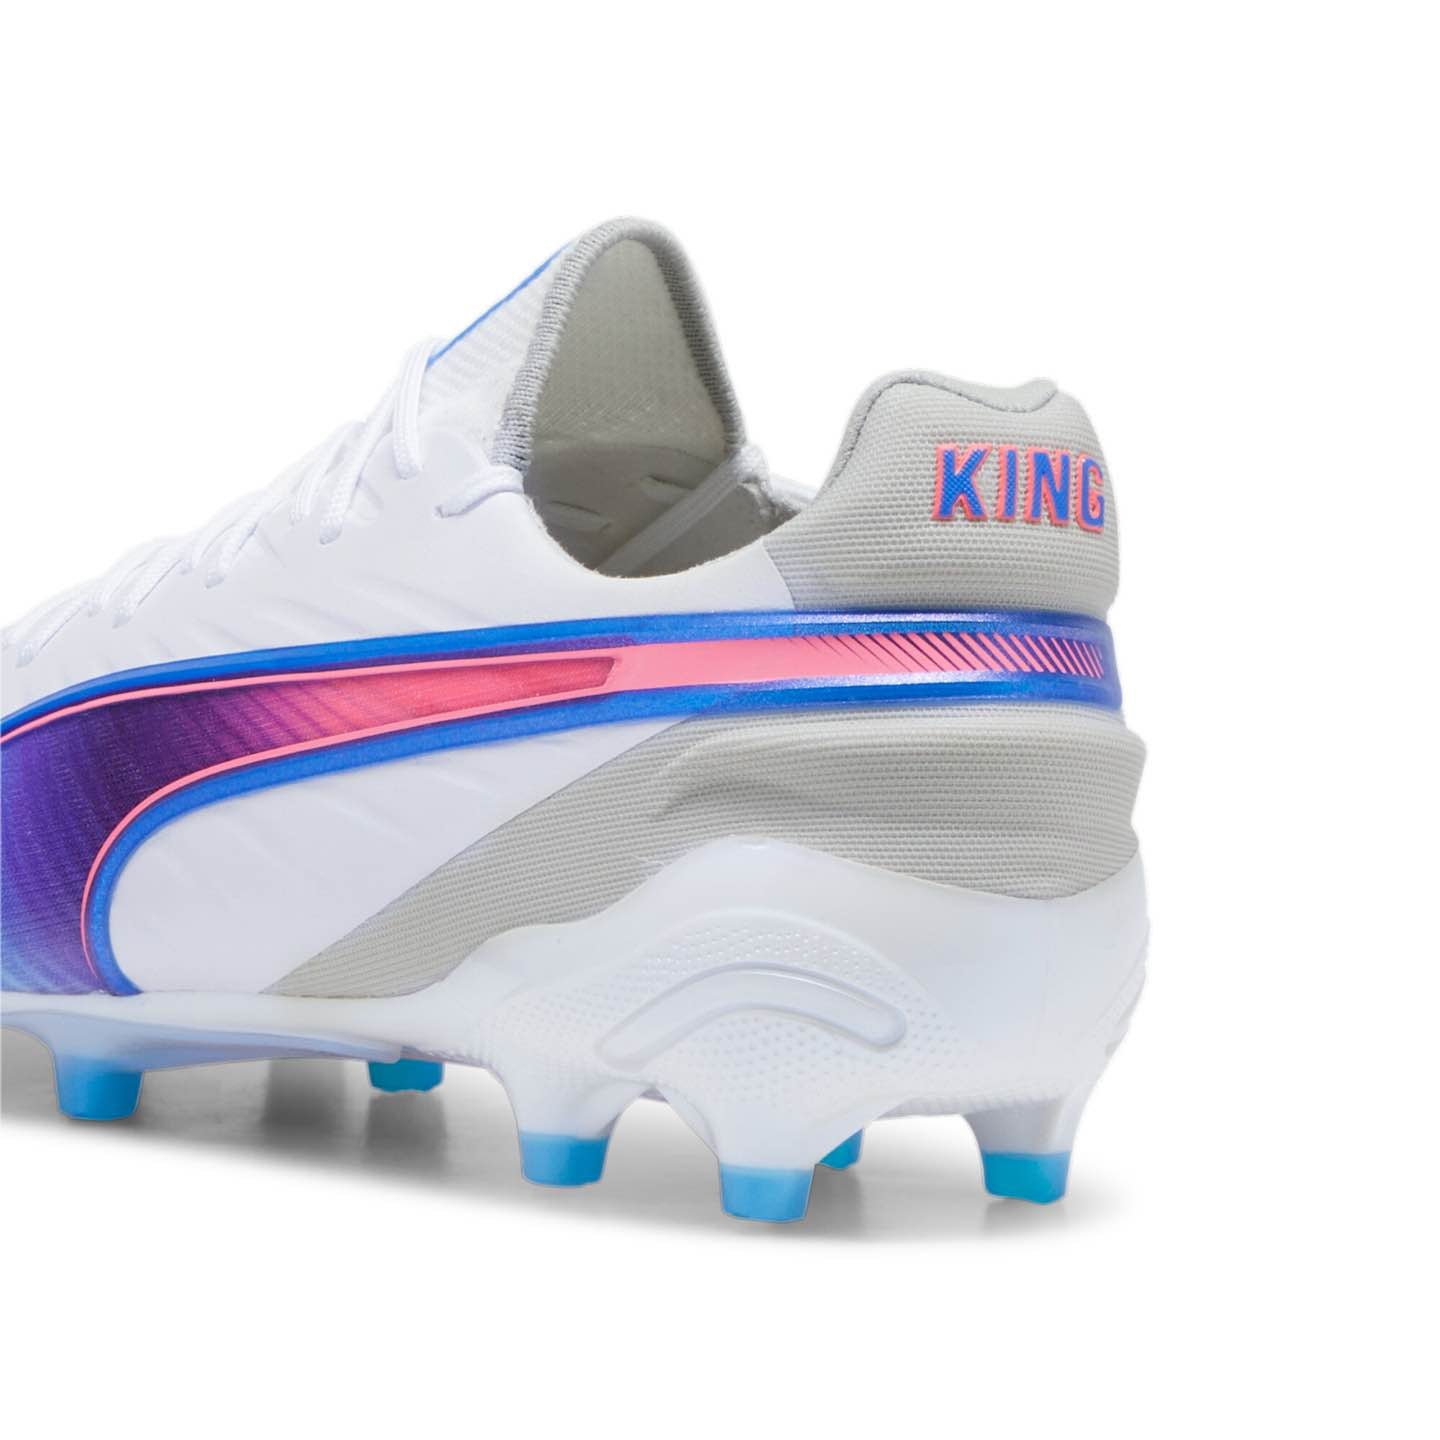 PUMA KING Ultimate FG/AG Firm-Ground and Artificial-Grass Soccer Cleats